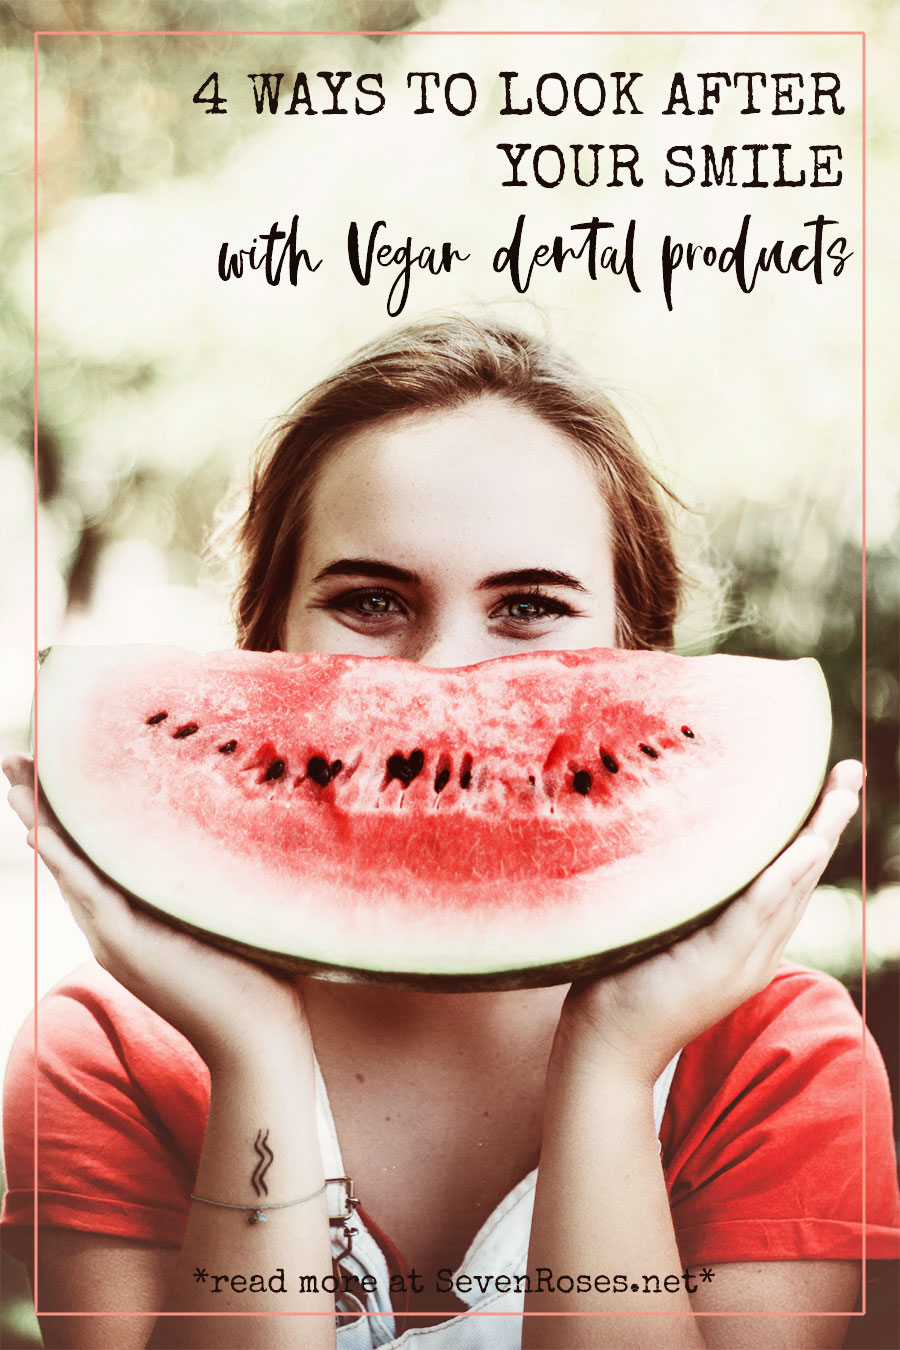 Looking after your smile with Vegan dental products